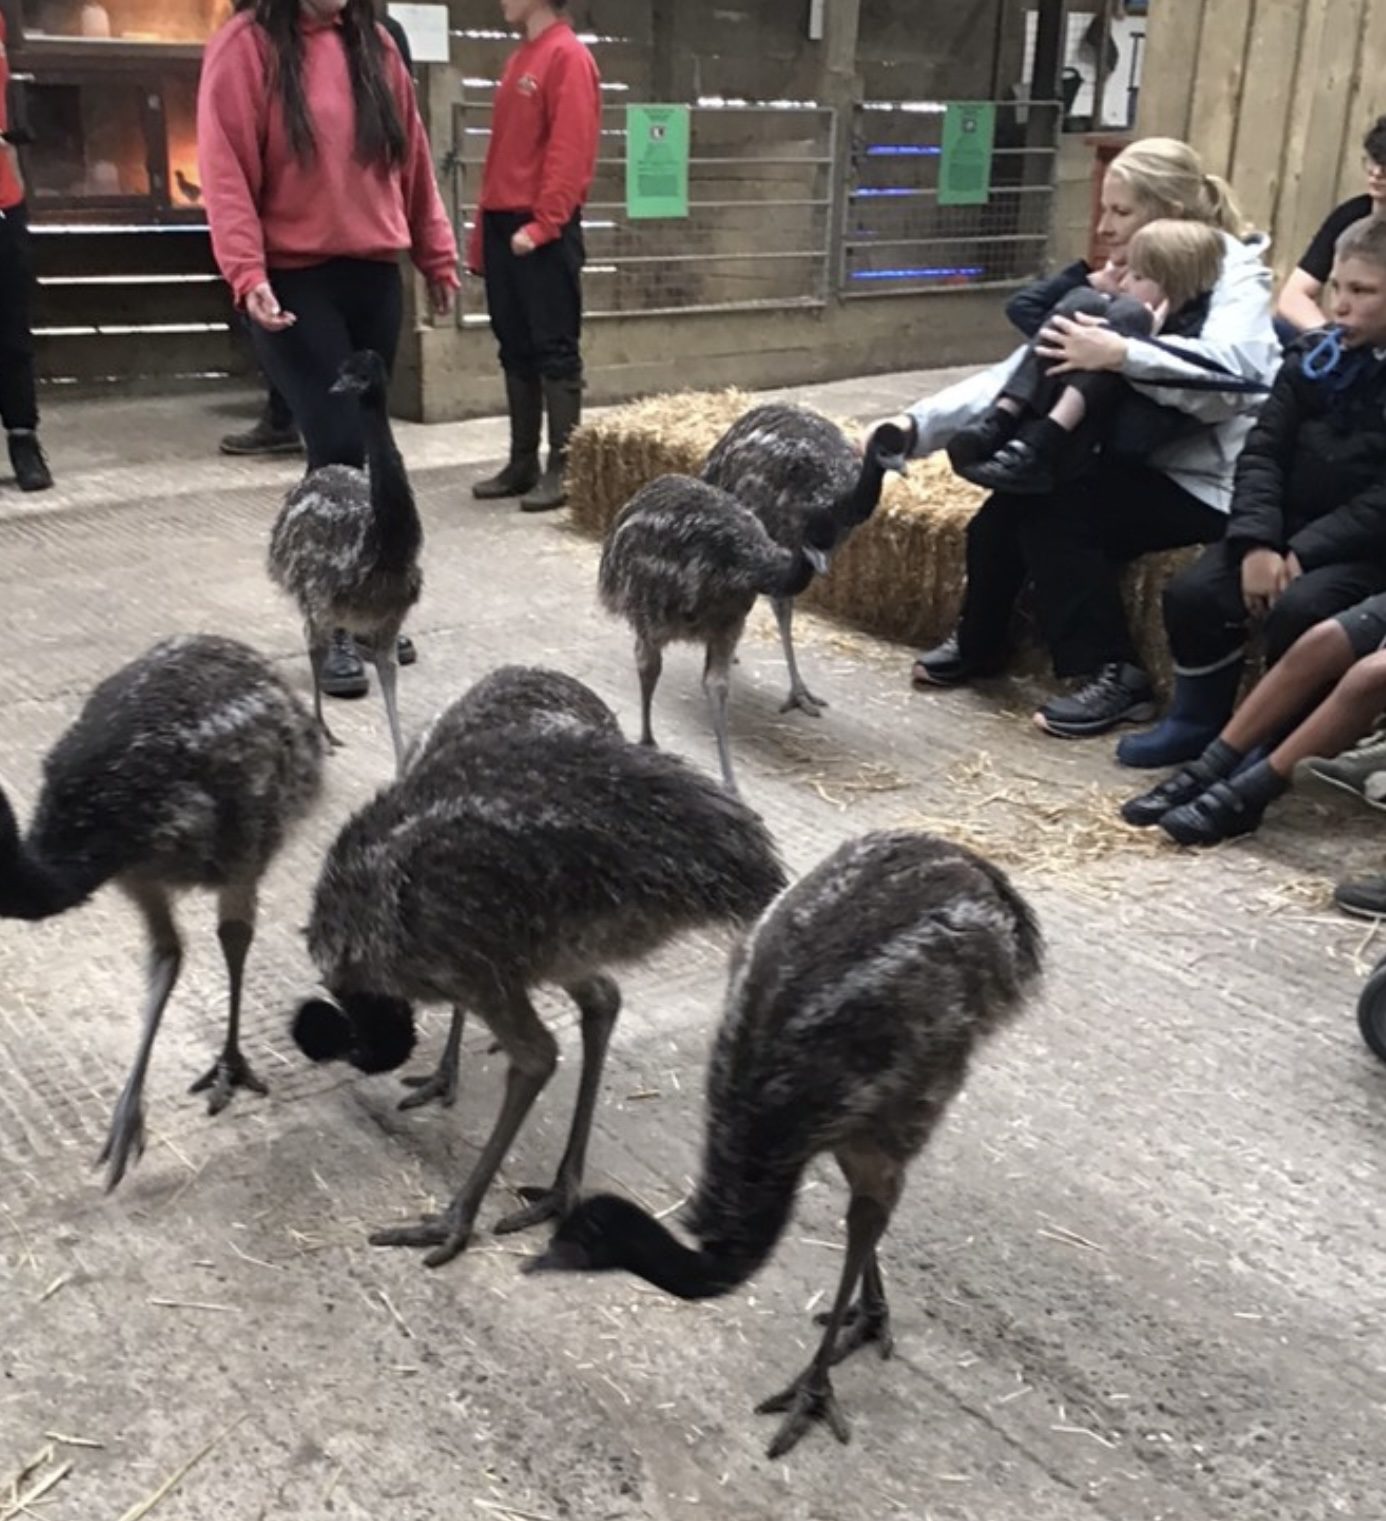 Student sits patiently as the baby ostriches parade in front of them.